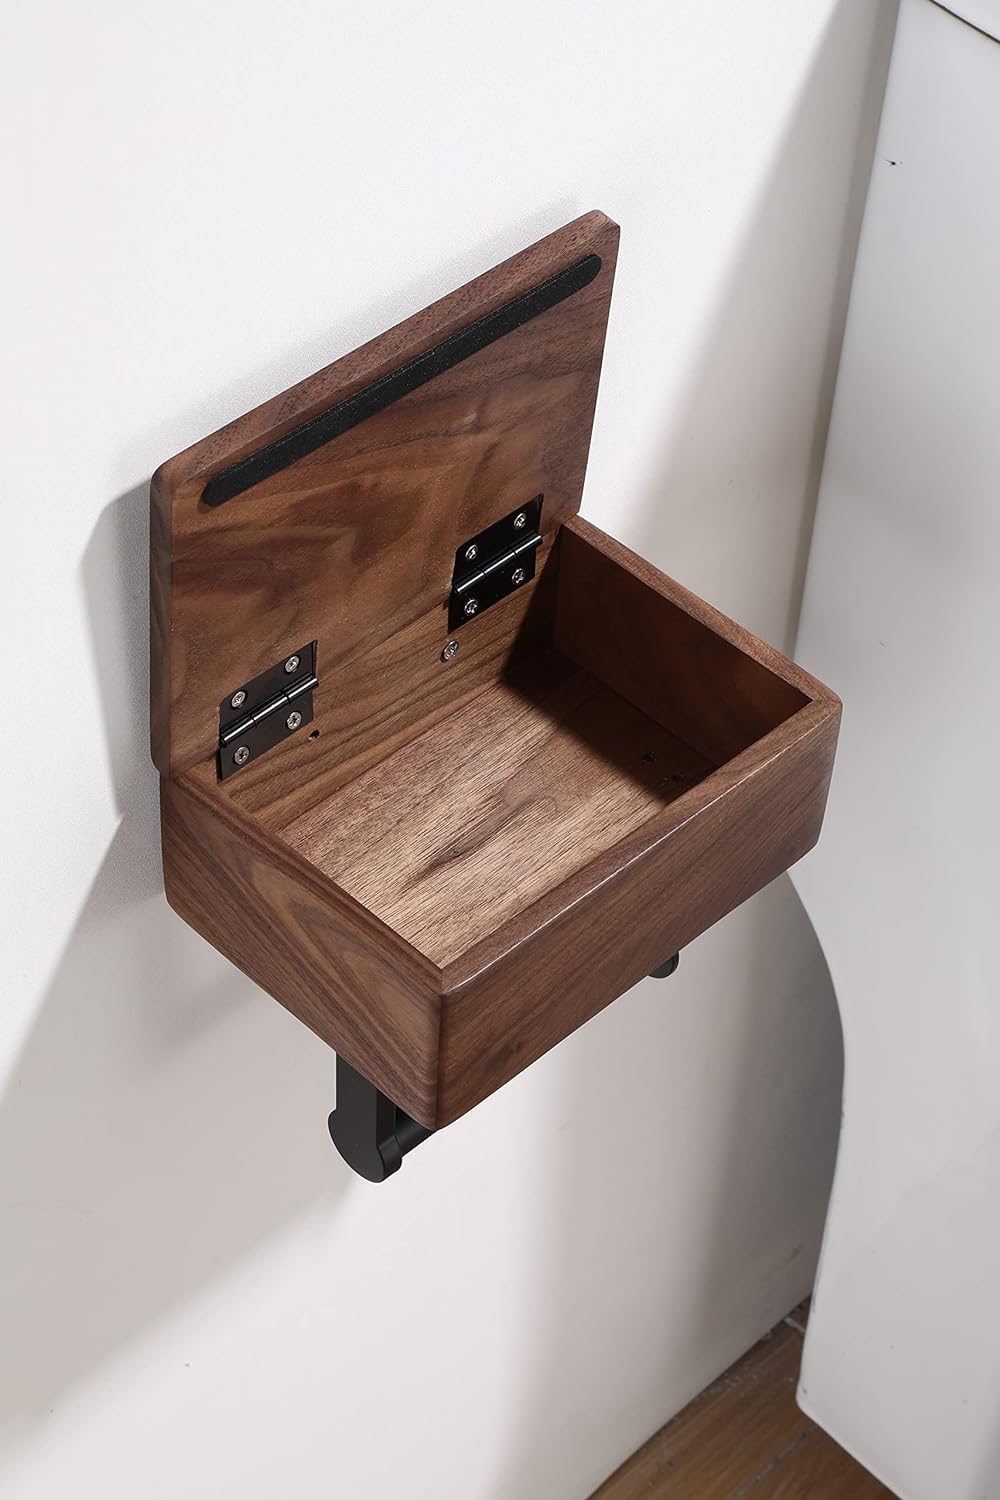 https://bigbigmart.com/wp-content/uploads/2023/10/Day-Moon-Designs-Toilet-Paper-Holder-with-Shelf-Flushable-Wipes-Dispenser-Storage-Fits-Any-Bathroom-Keep-Your-Wet-Wipes-Hidden-Wooden-Wall-Mount-Bathroom-Organizer-Small-Dark-Wood6.jpg